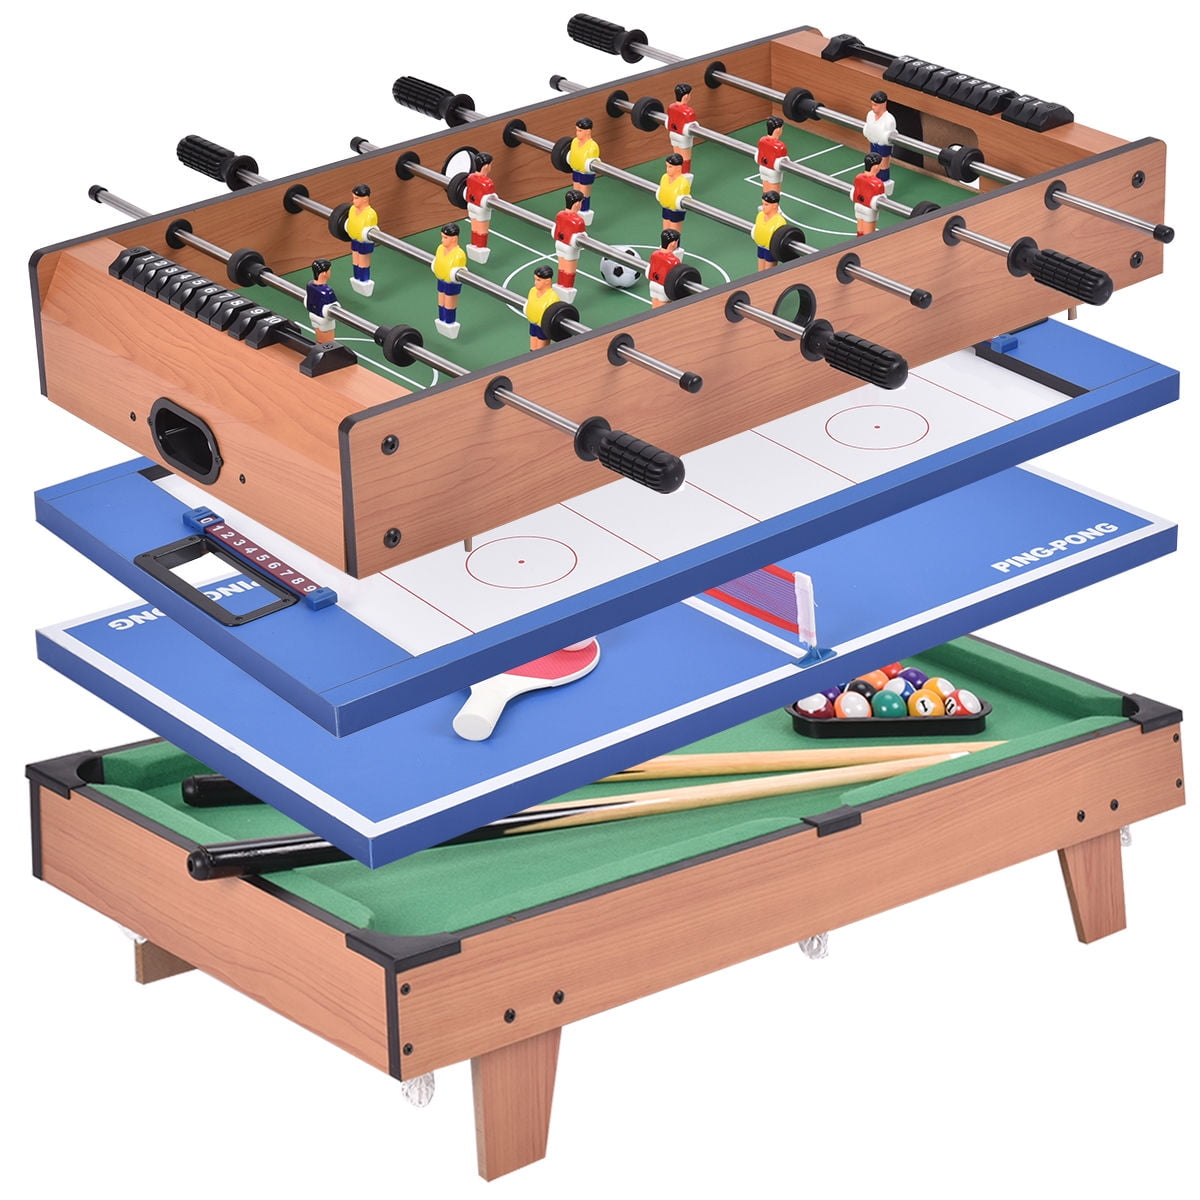 Hathaway Toys Game Foosball Tables Playoff Soccer Table 4 Feet Black Green 3 Man for sale online 